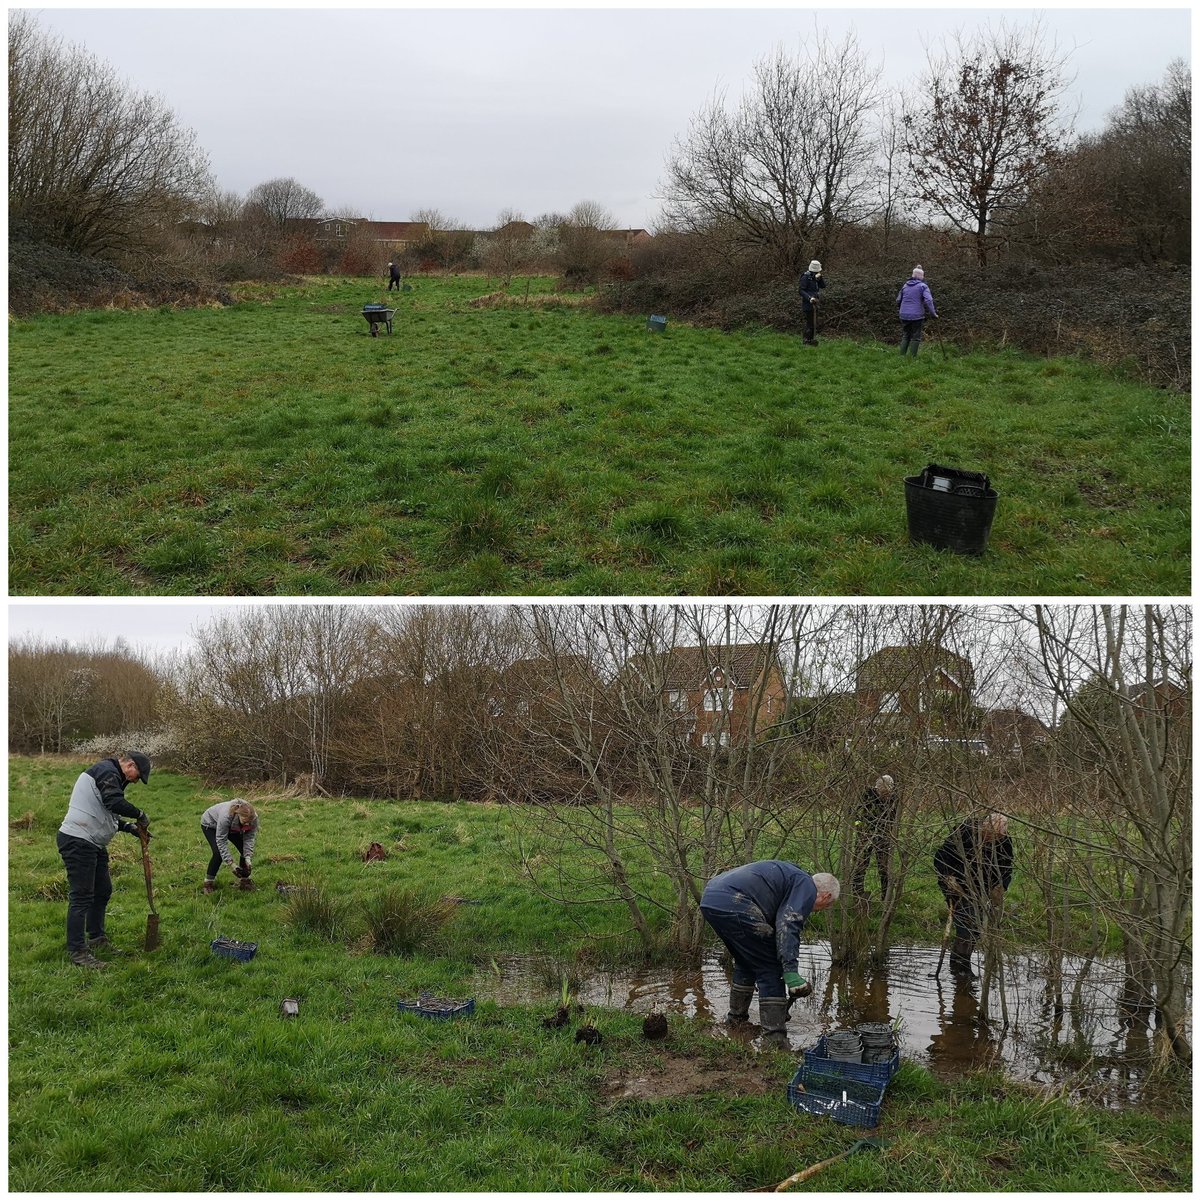 St Mellons & Trowbridge Conservation Volunteers were busy bees at Hendre Lake on Sat, planting 300 native wildflowers to increase species diversity. These plants will be fantastic for all pollinators, list in photo. Thanks to Cardiff Community Park Rangers facebook.com/groups/7689080…